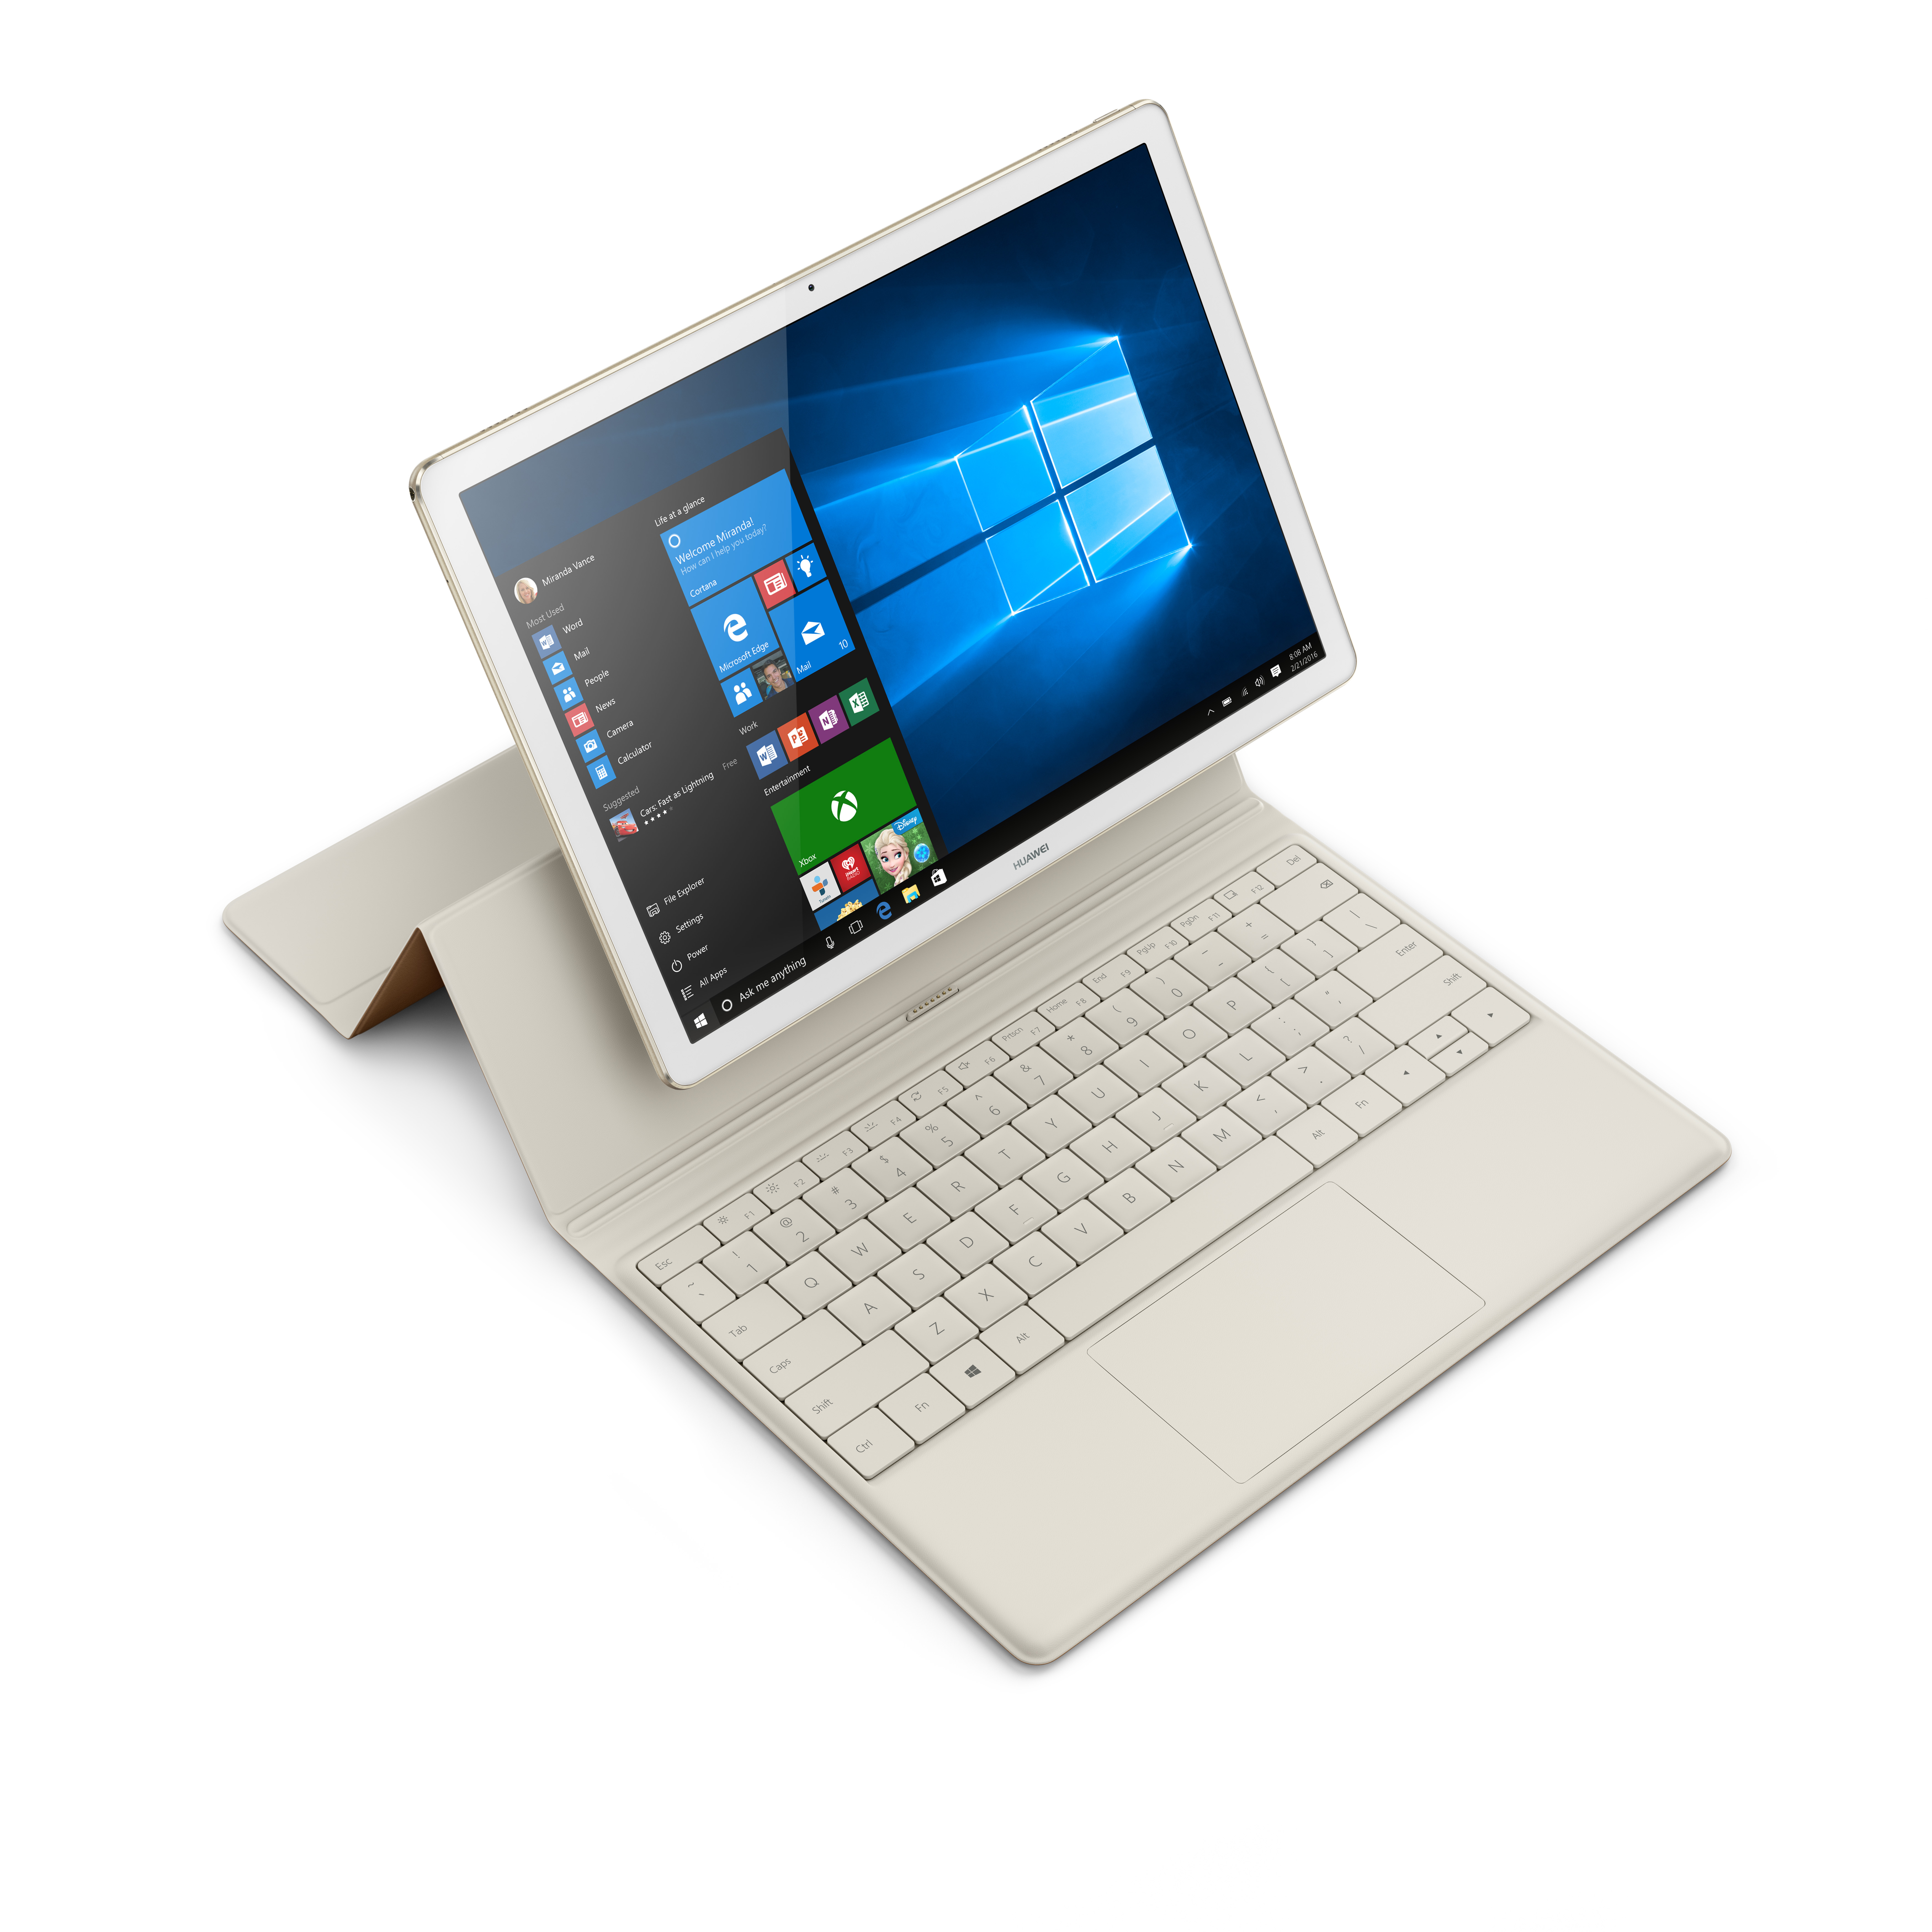 Huawei Announces the HUAWEI MateBook, a 2-in-1 Laptop with Windows